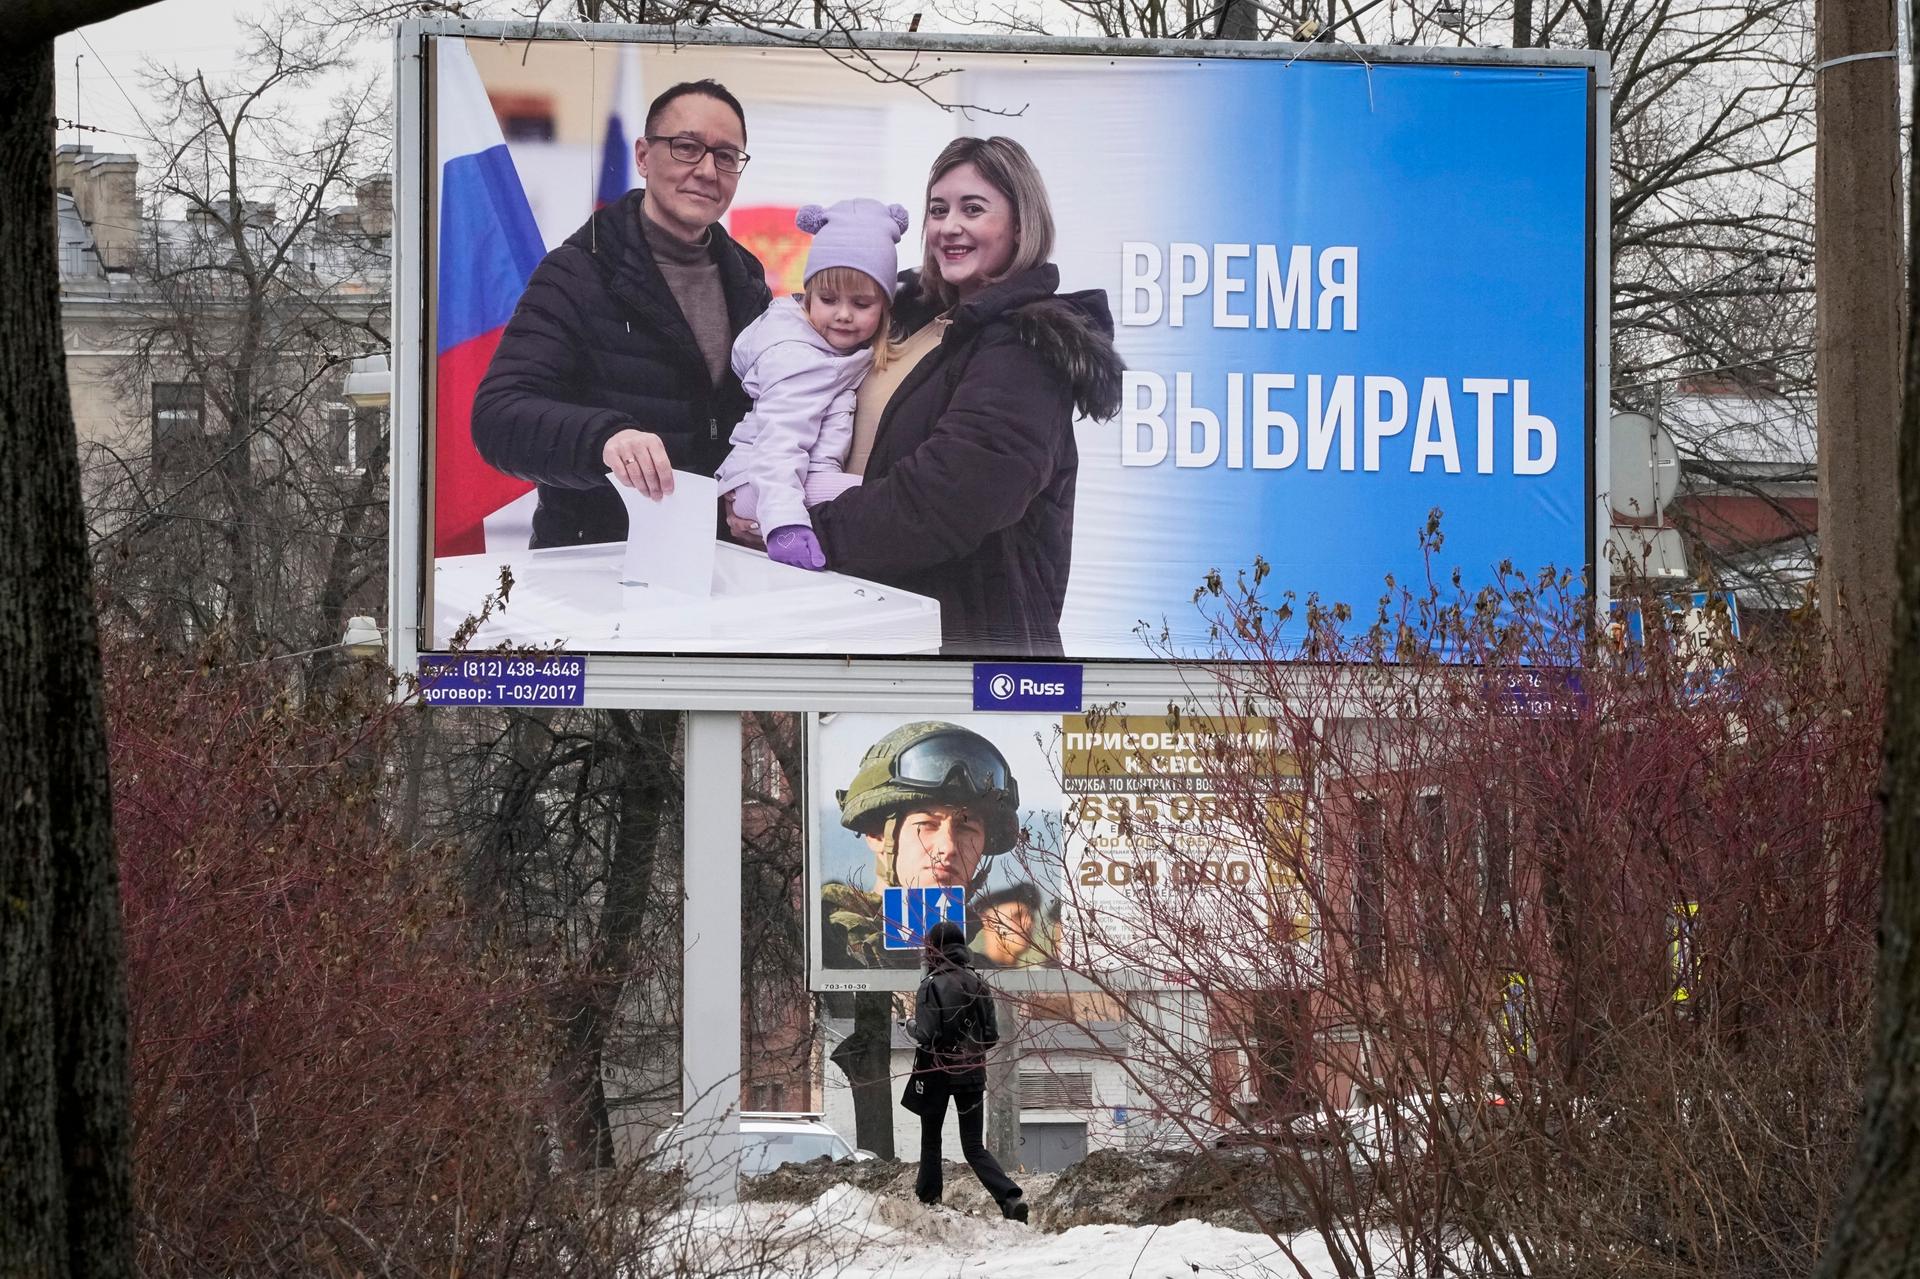 A woman walks past a billboard promoting the upcoming presidential election with the words in Russian 